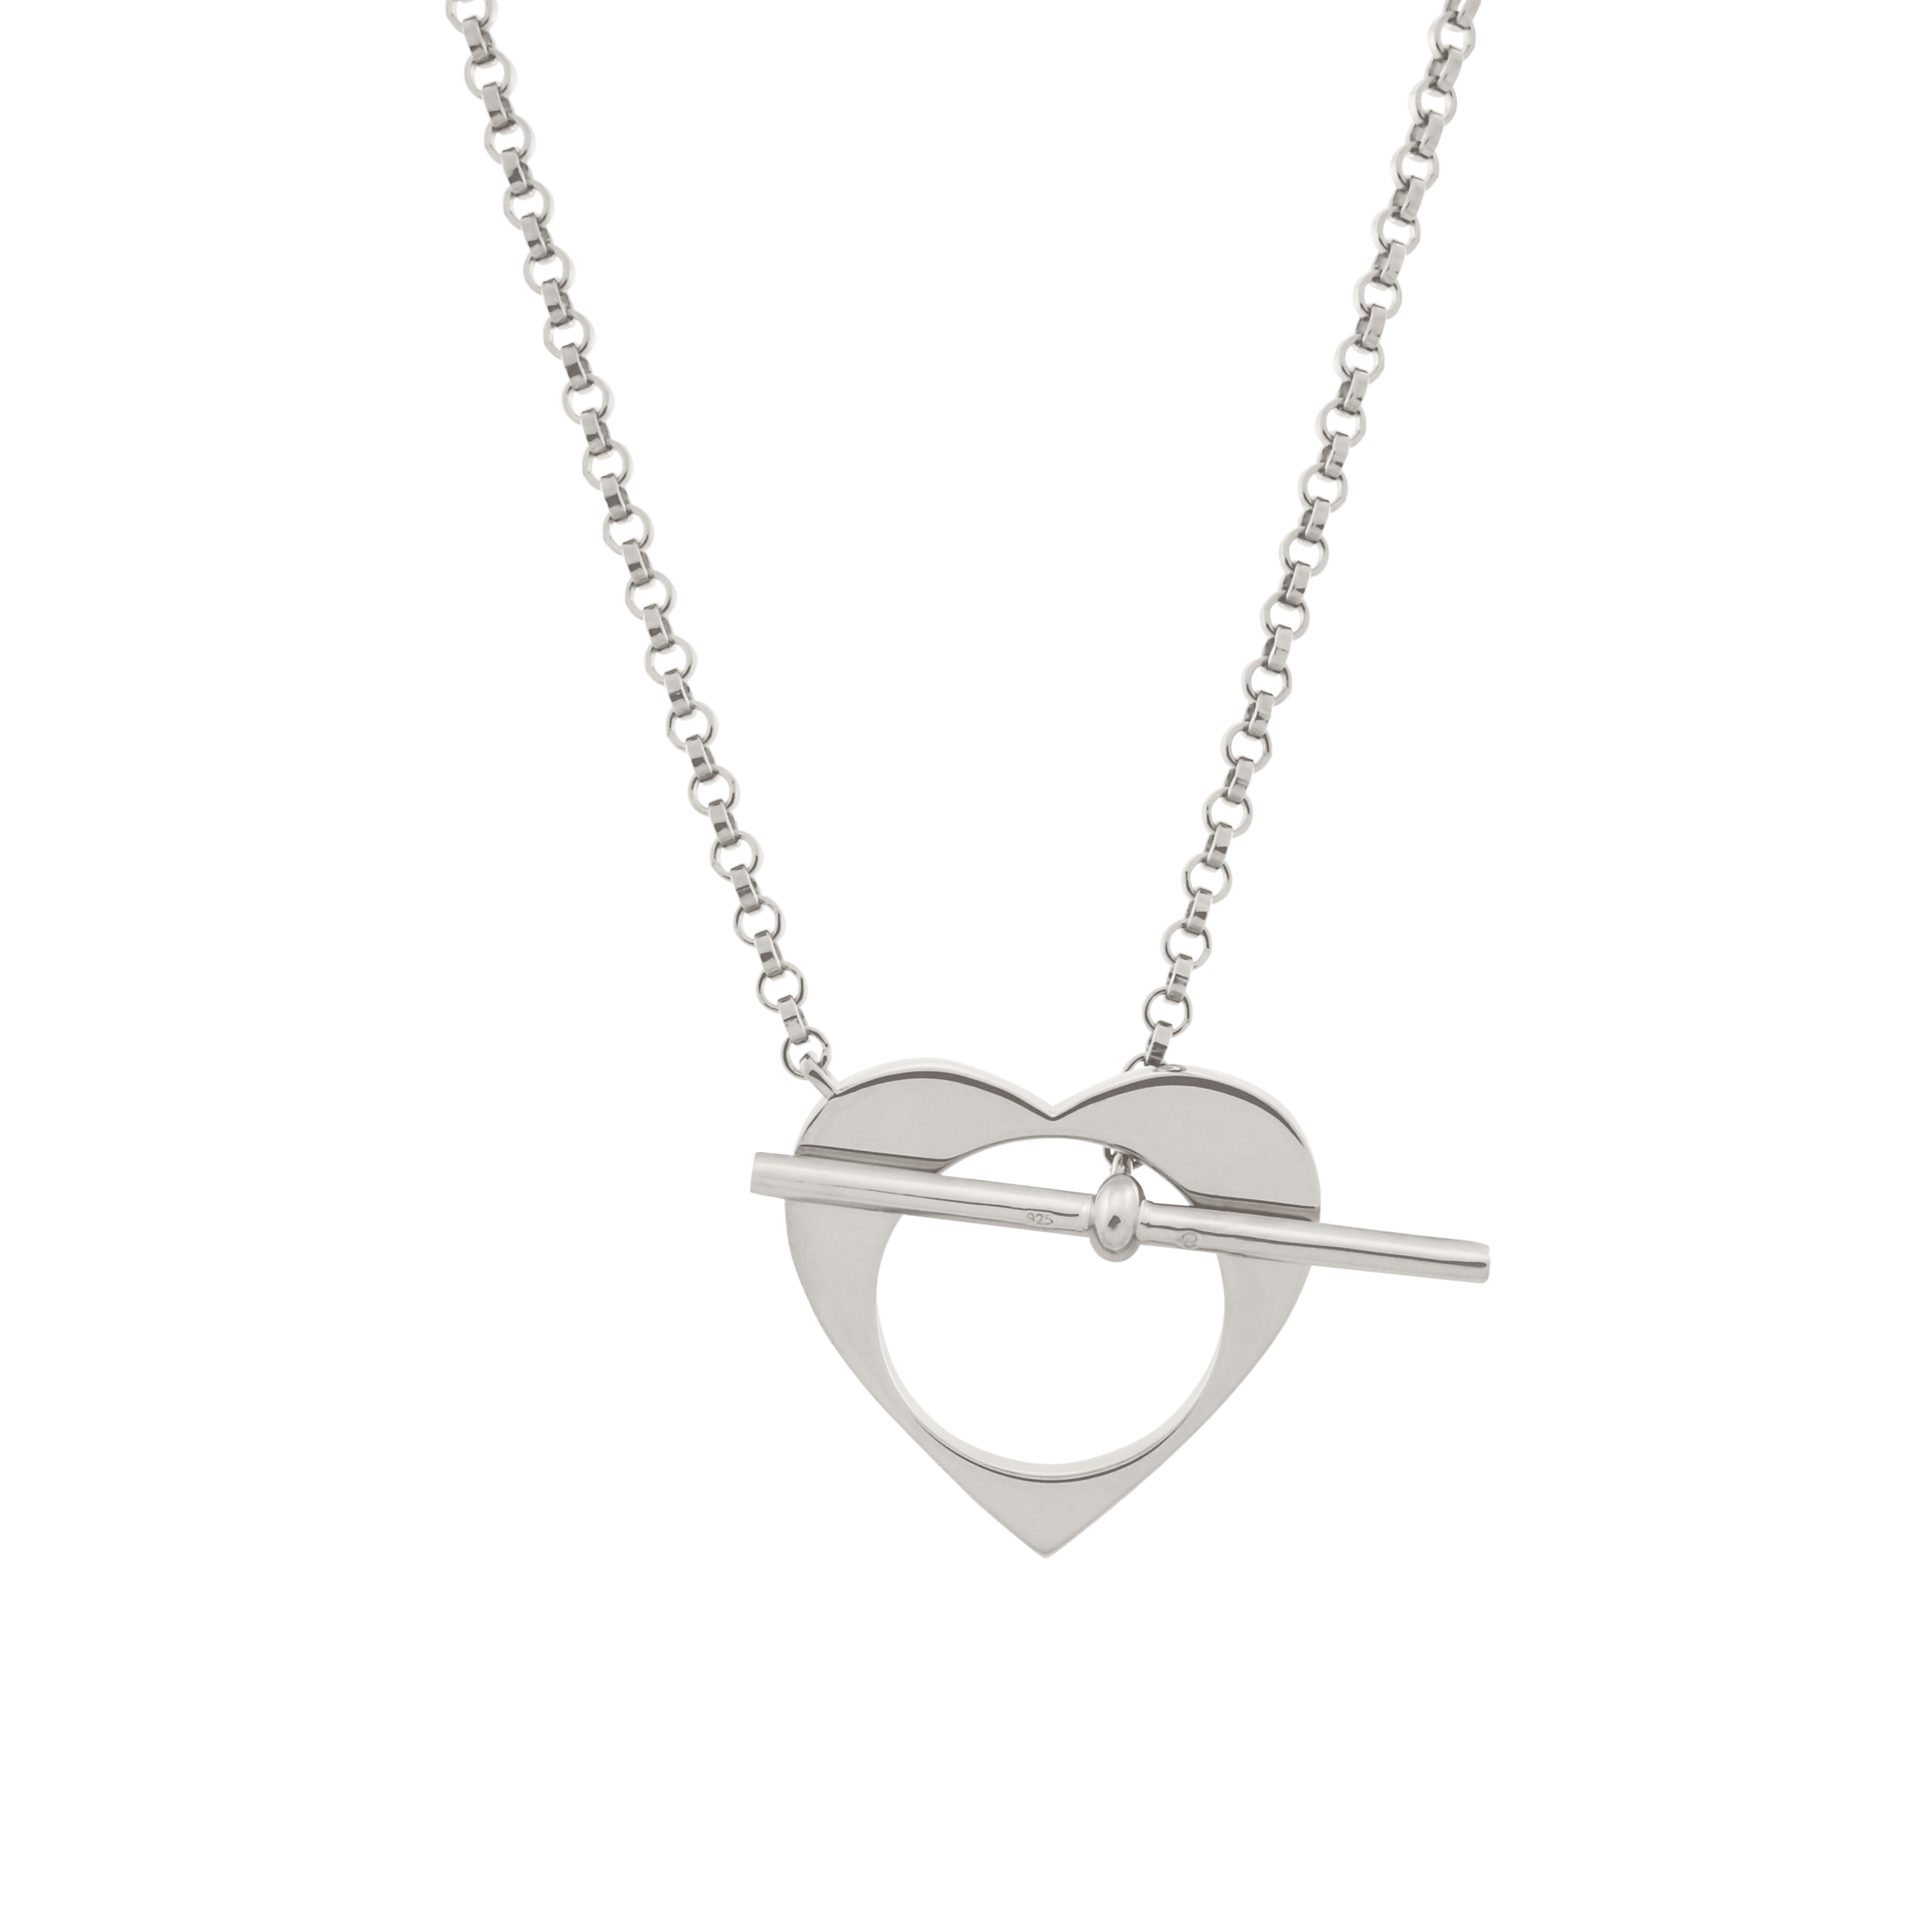 Romeus Heart Necklace. Sterling Silver